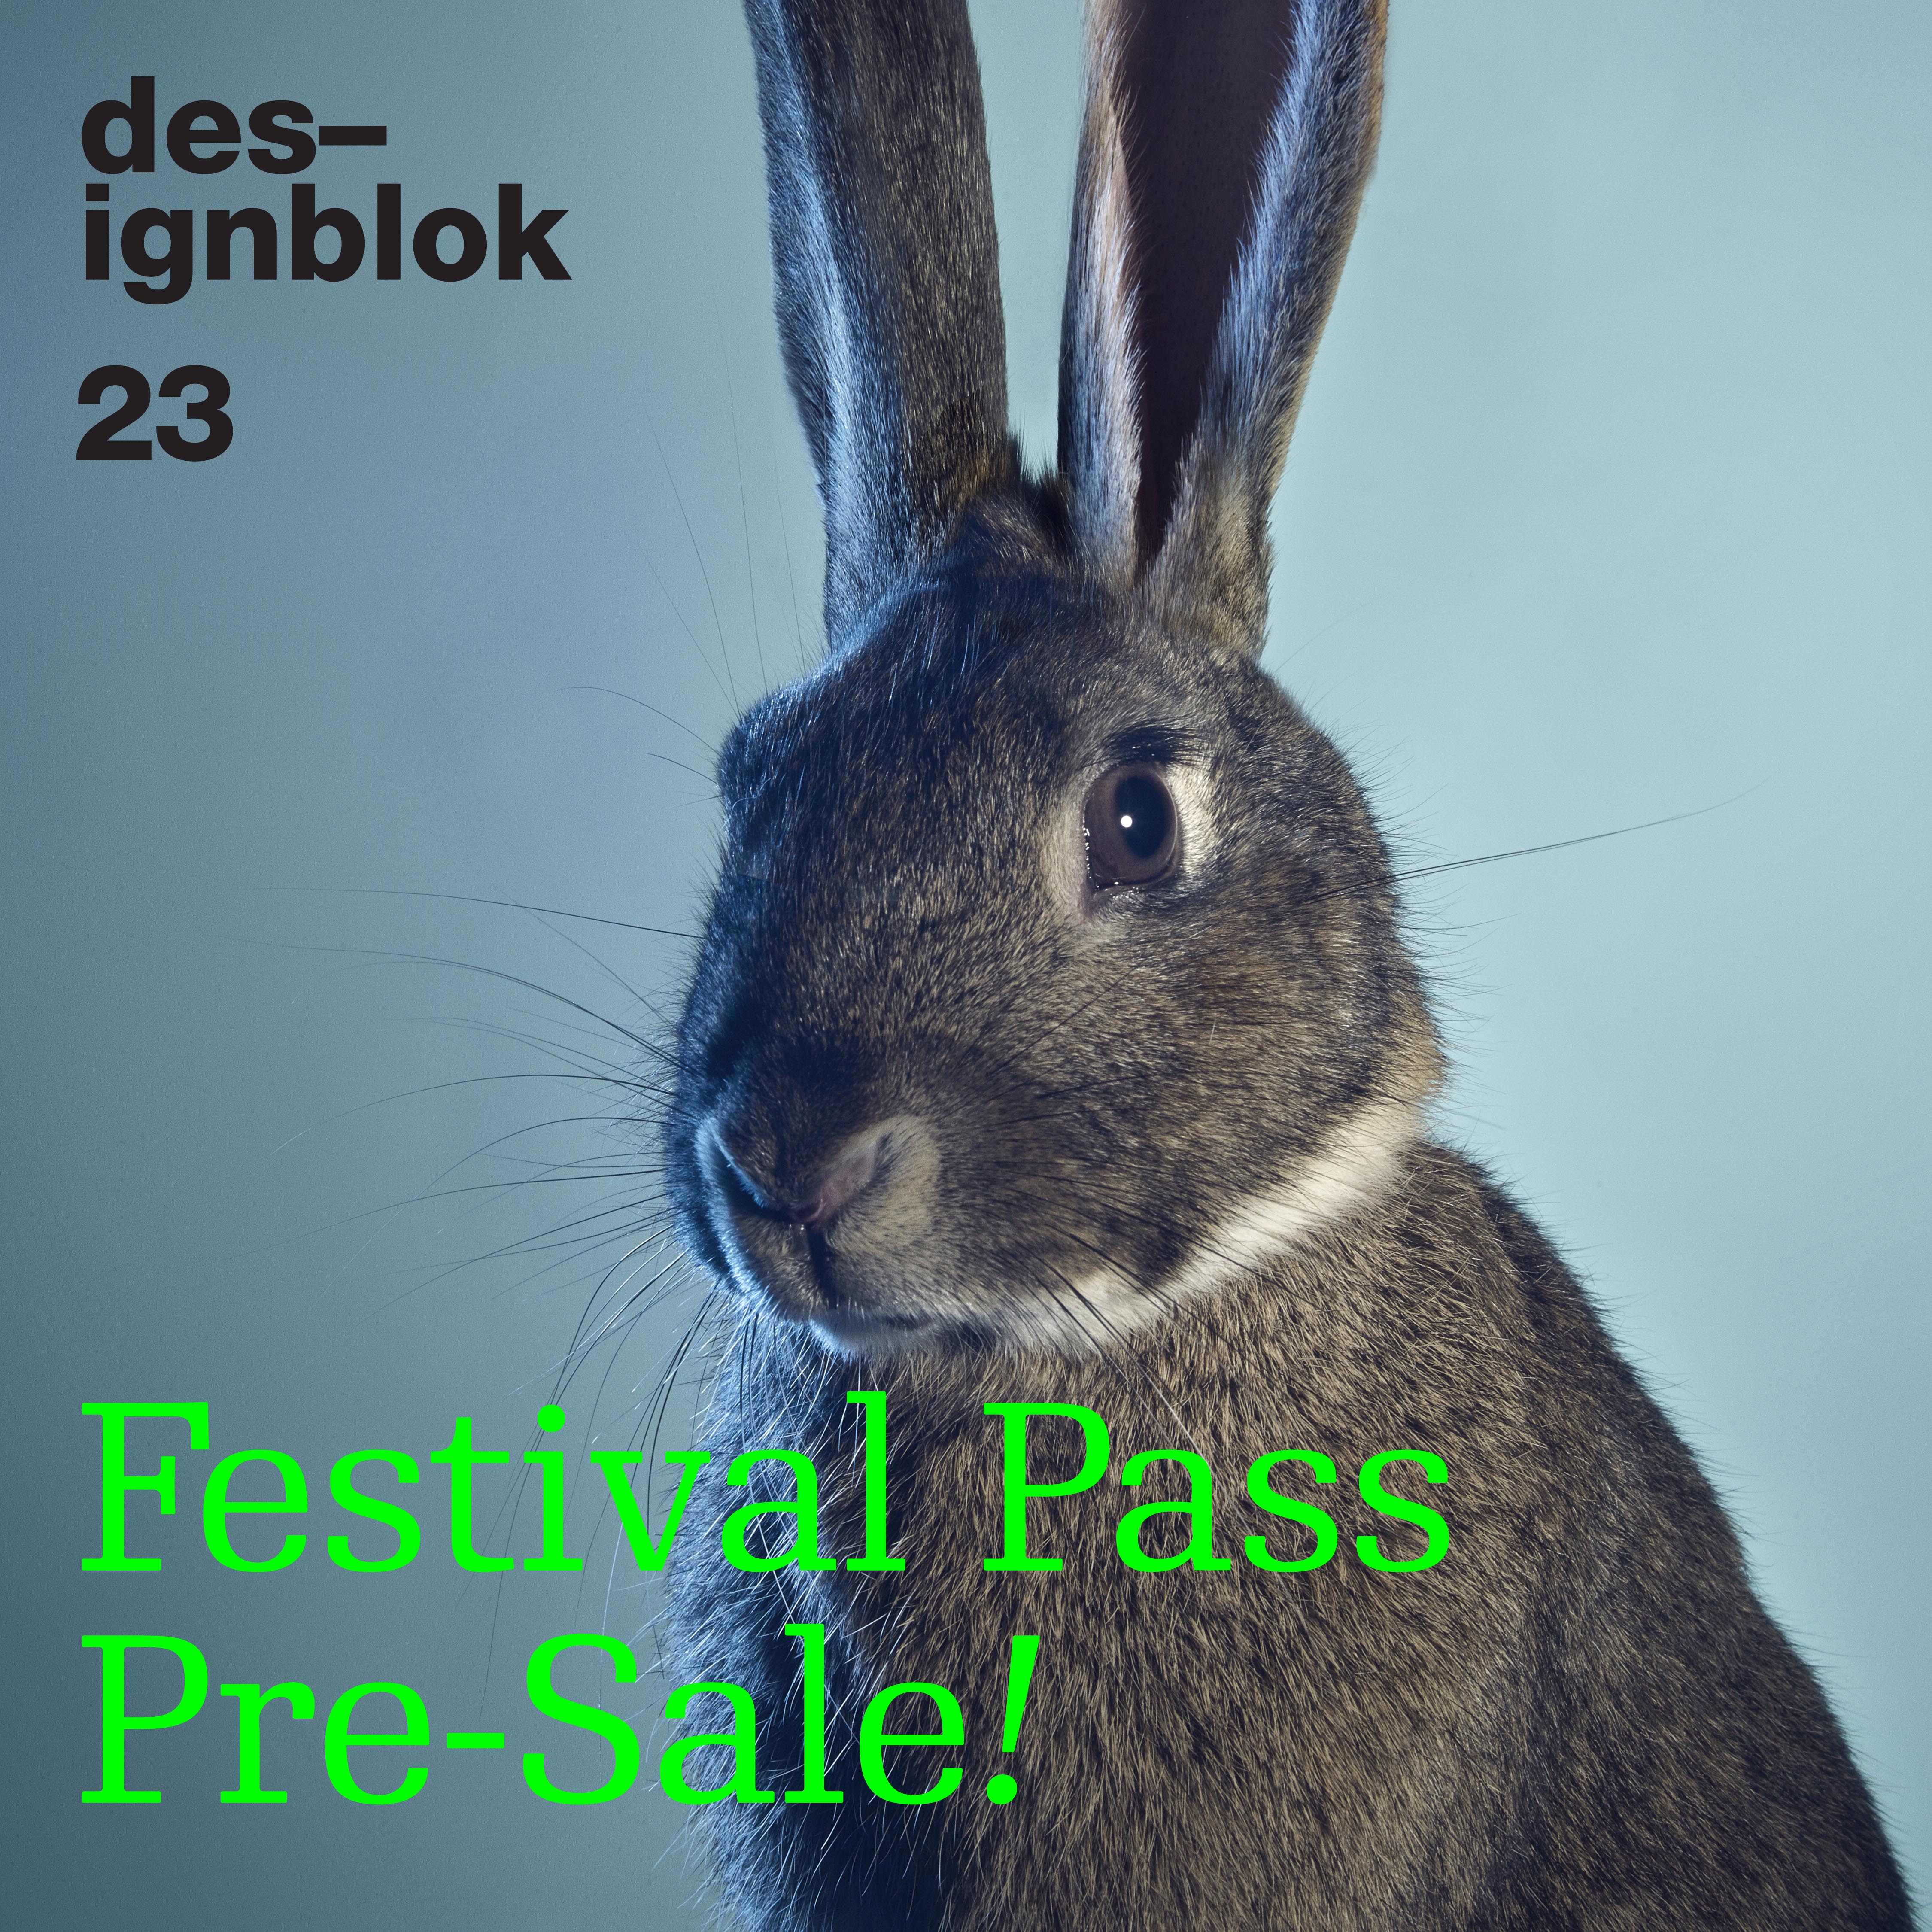 Pre-sale of discounted festival passes started!